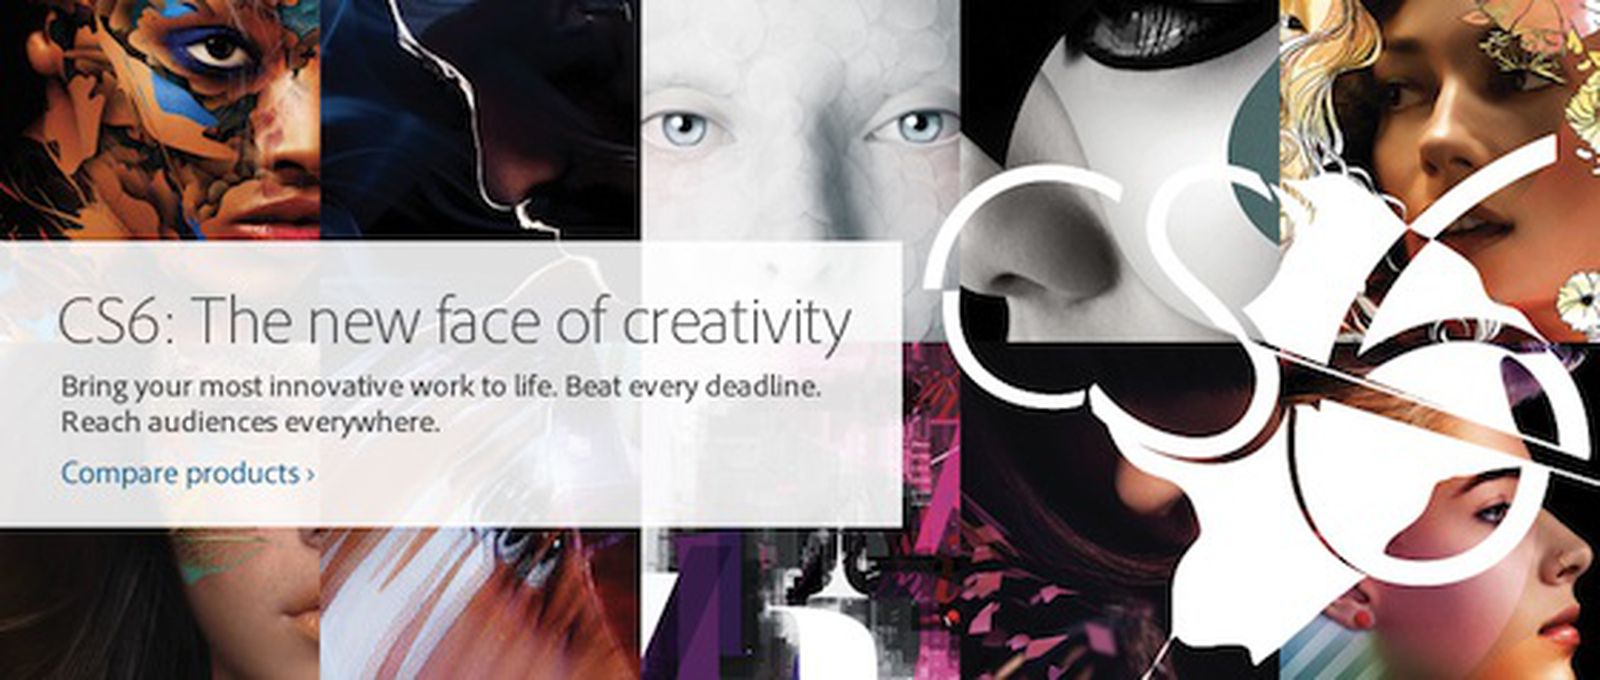 creative suite for mac download